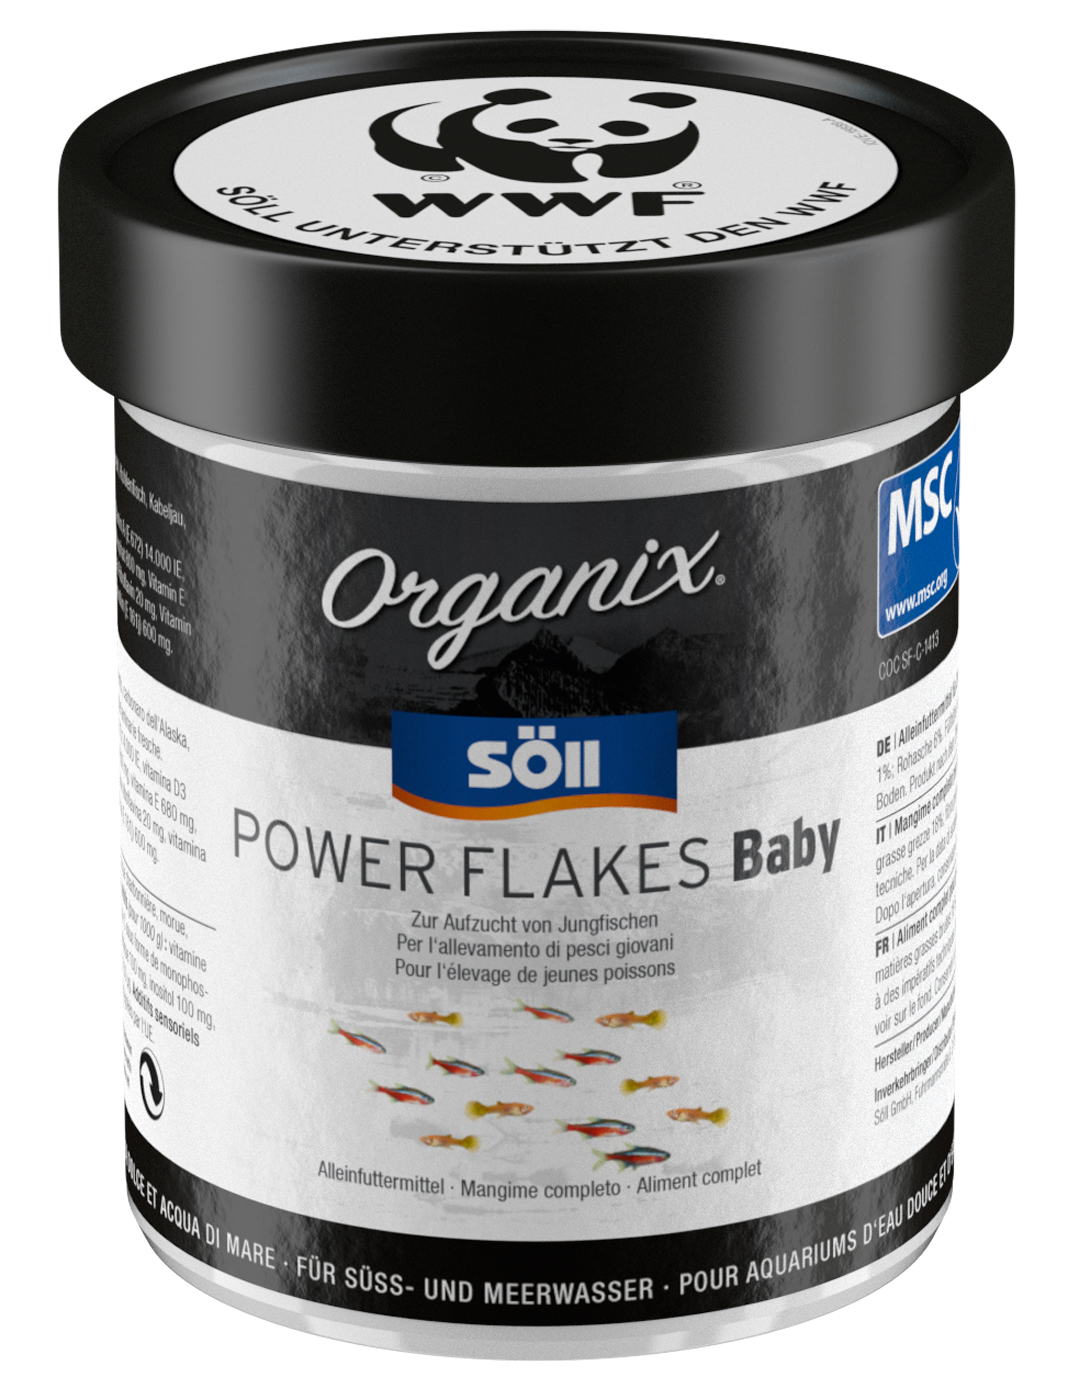 Organix Power Flakes Baby 130 ml + product picture